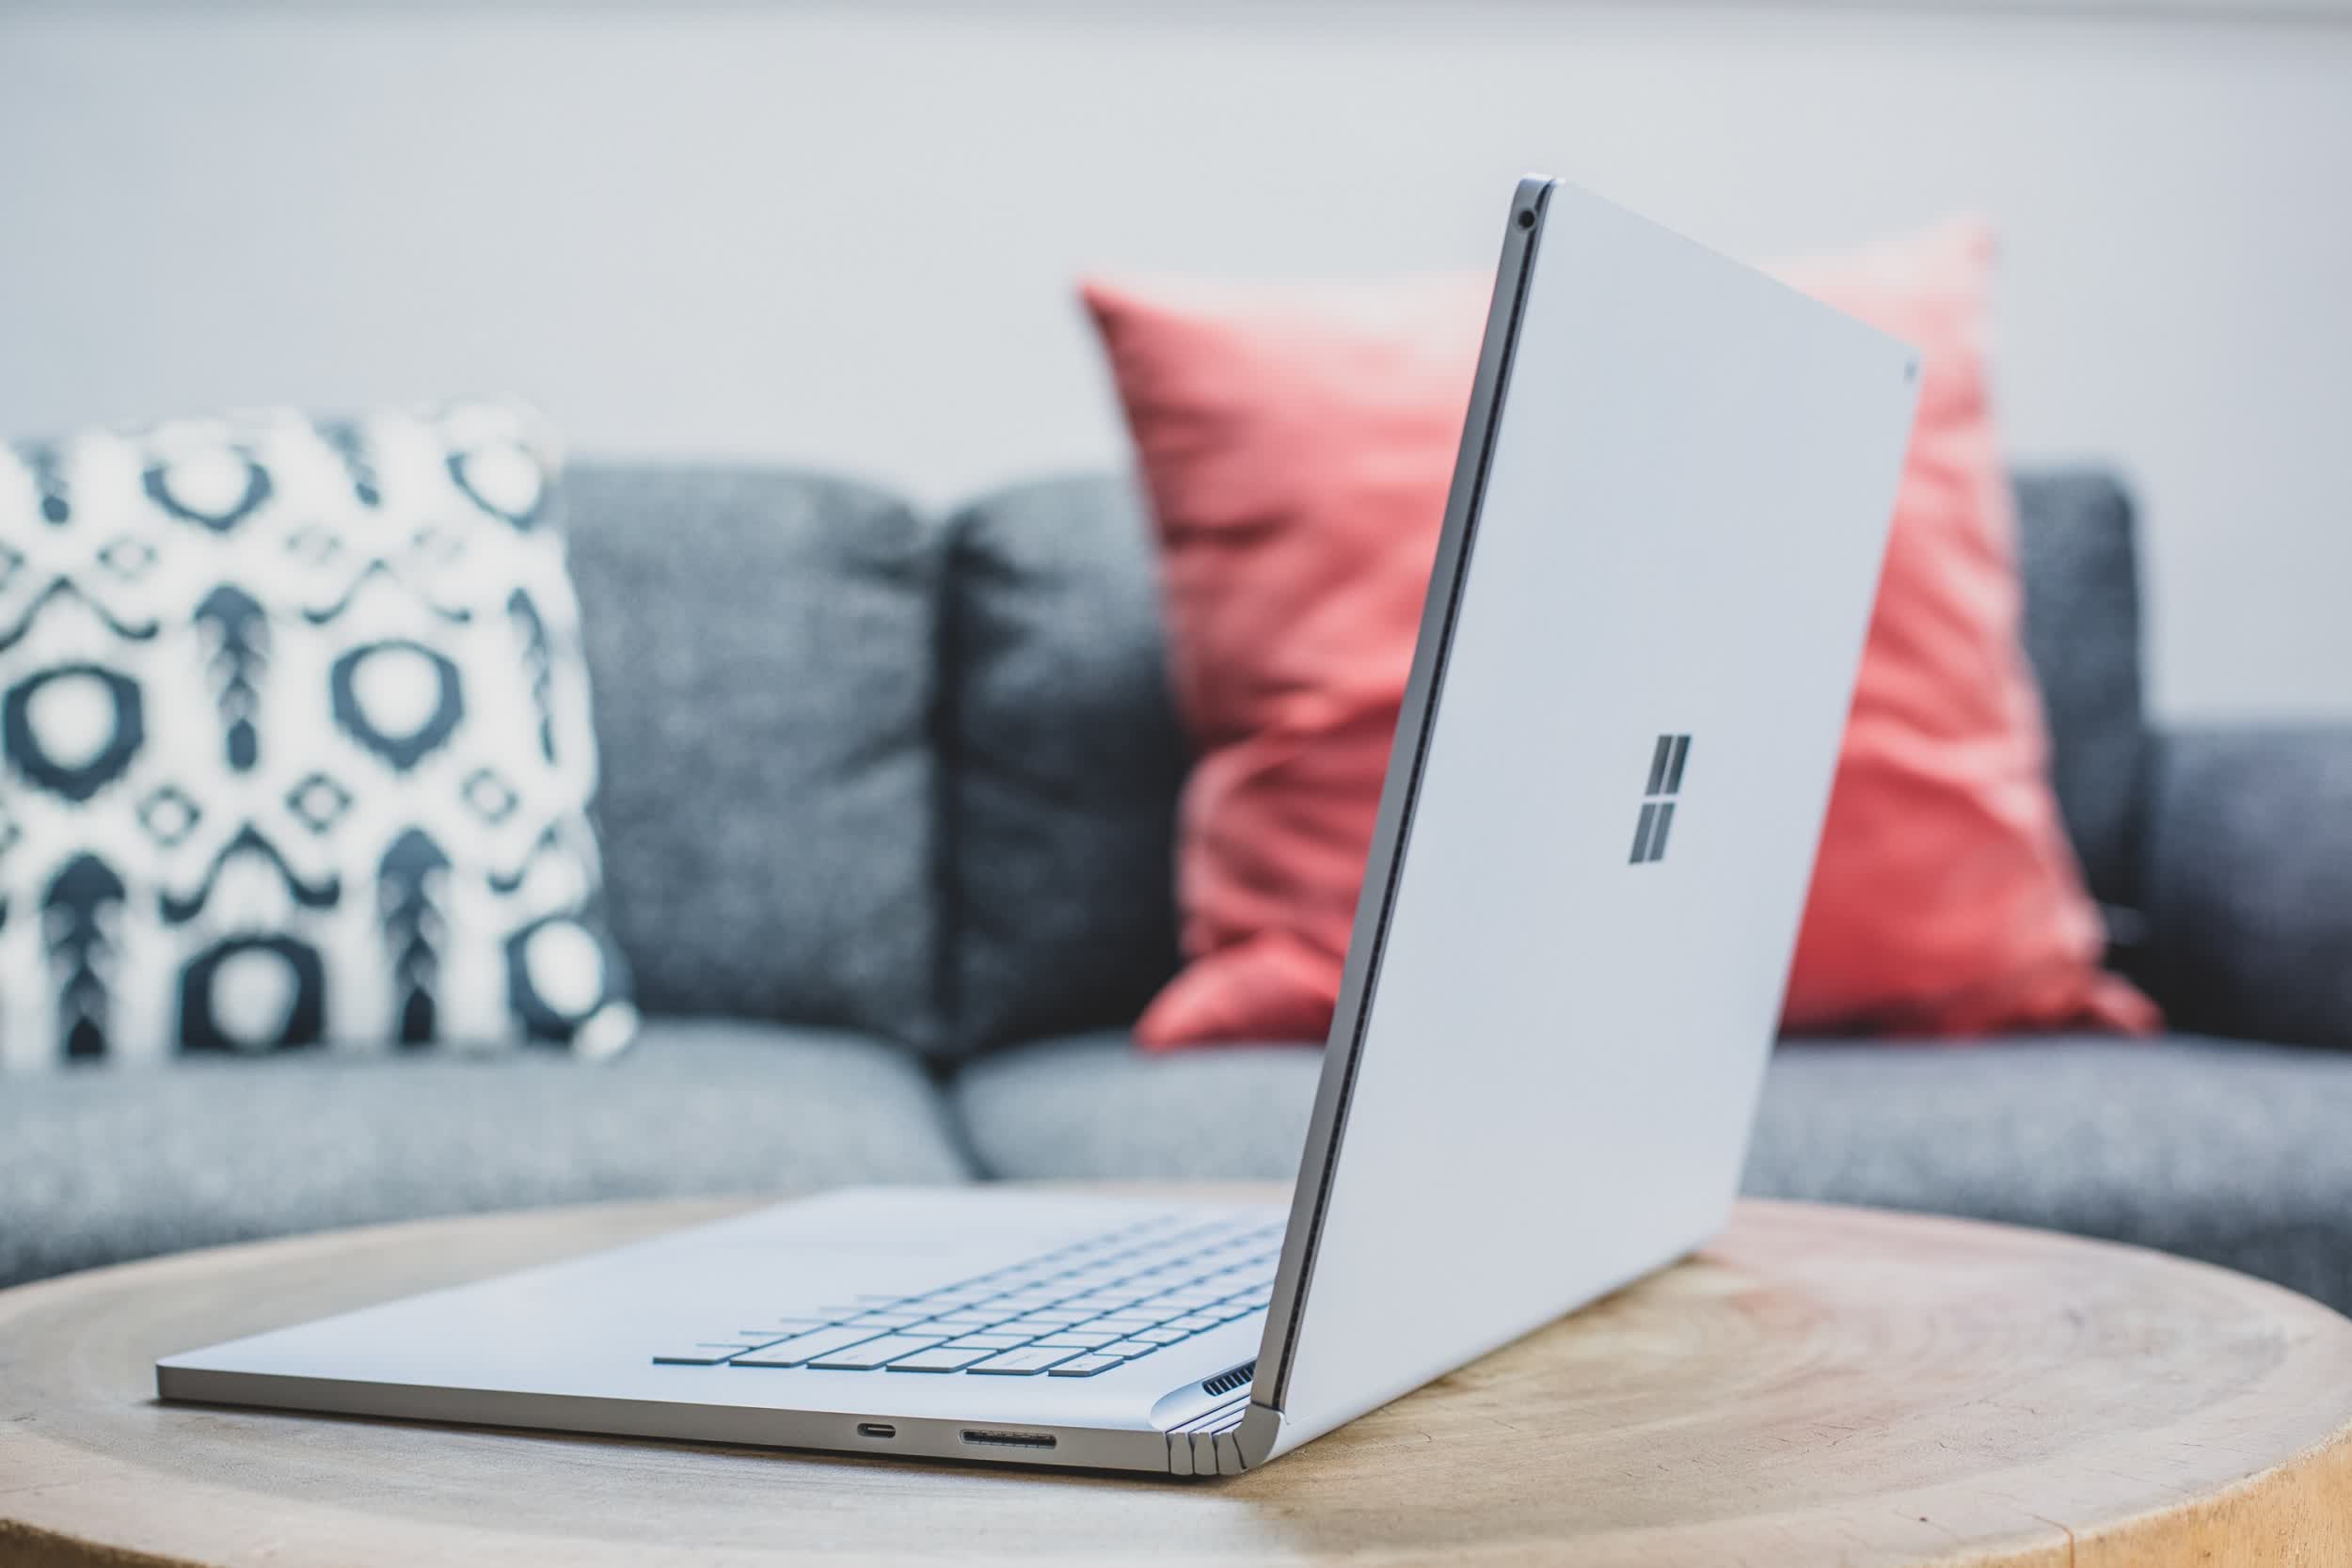 You can now buy Surface replacement parts directly from the Microsoft Store